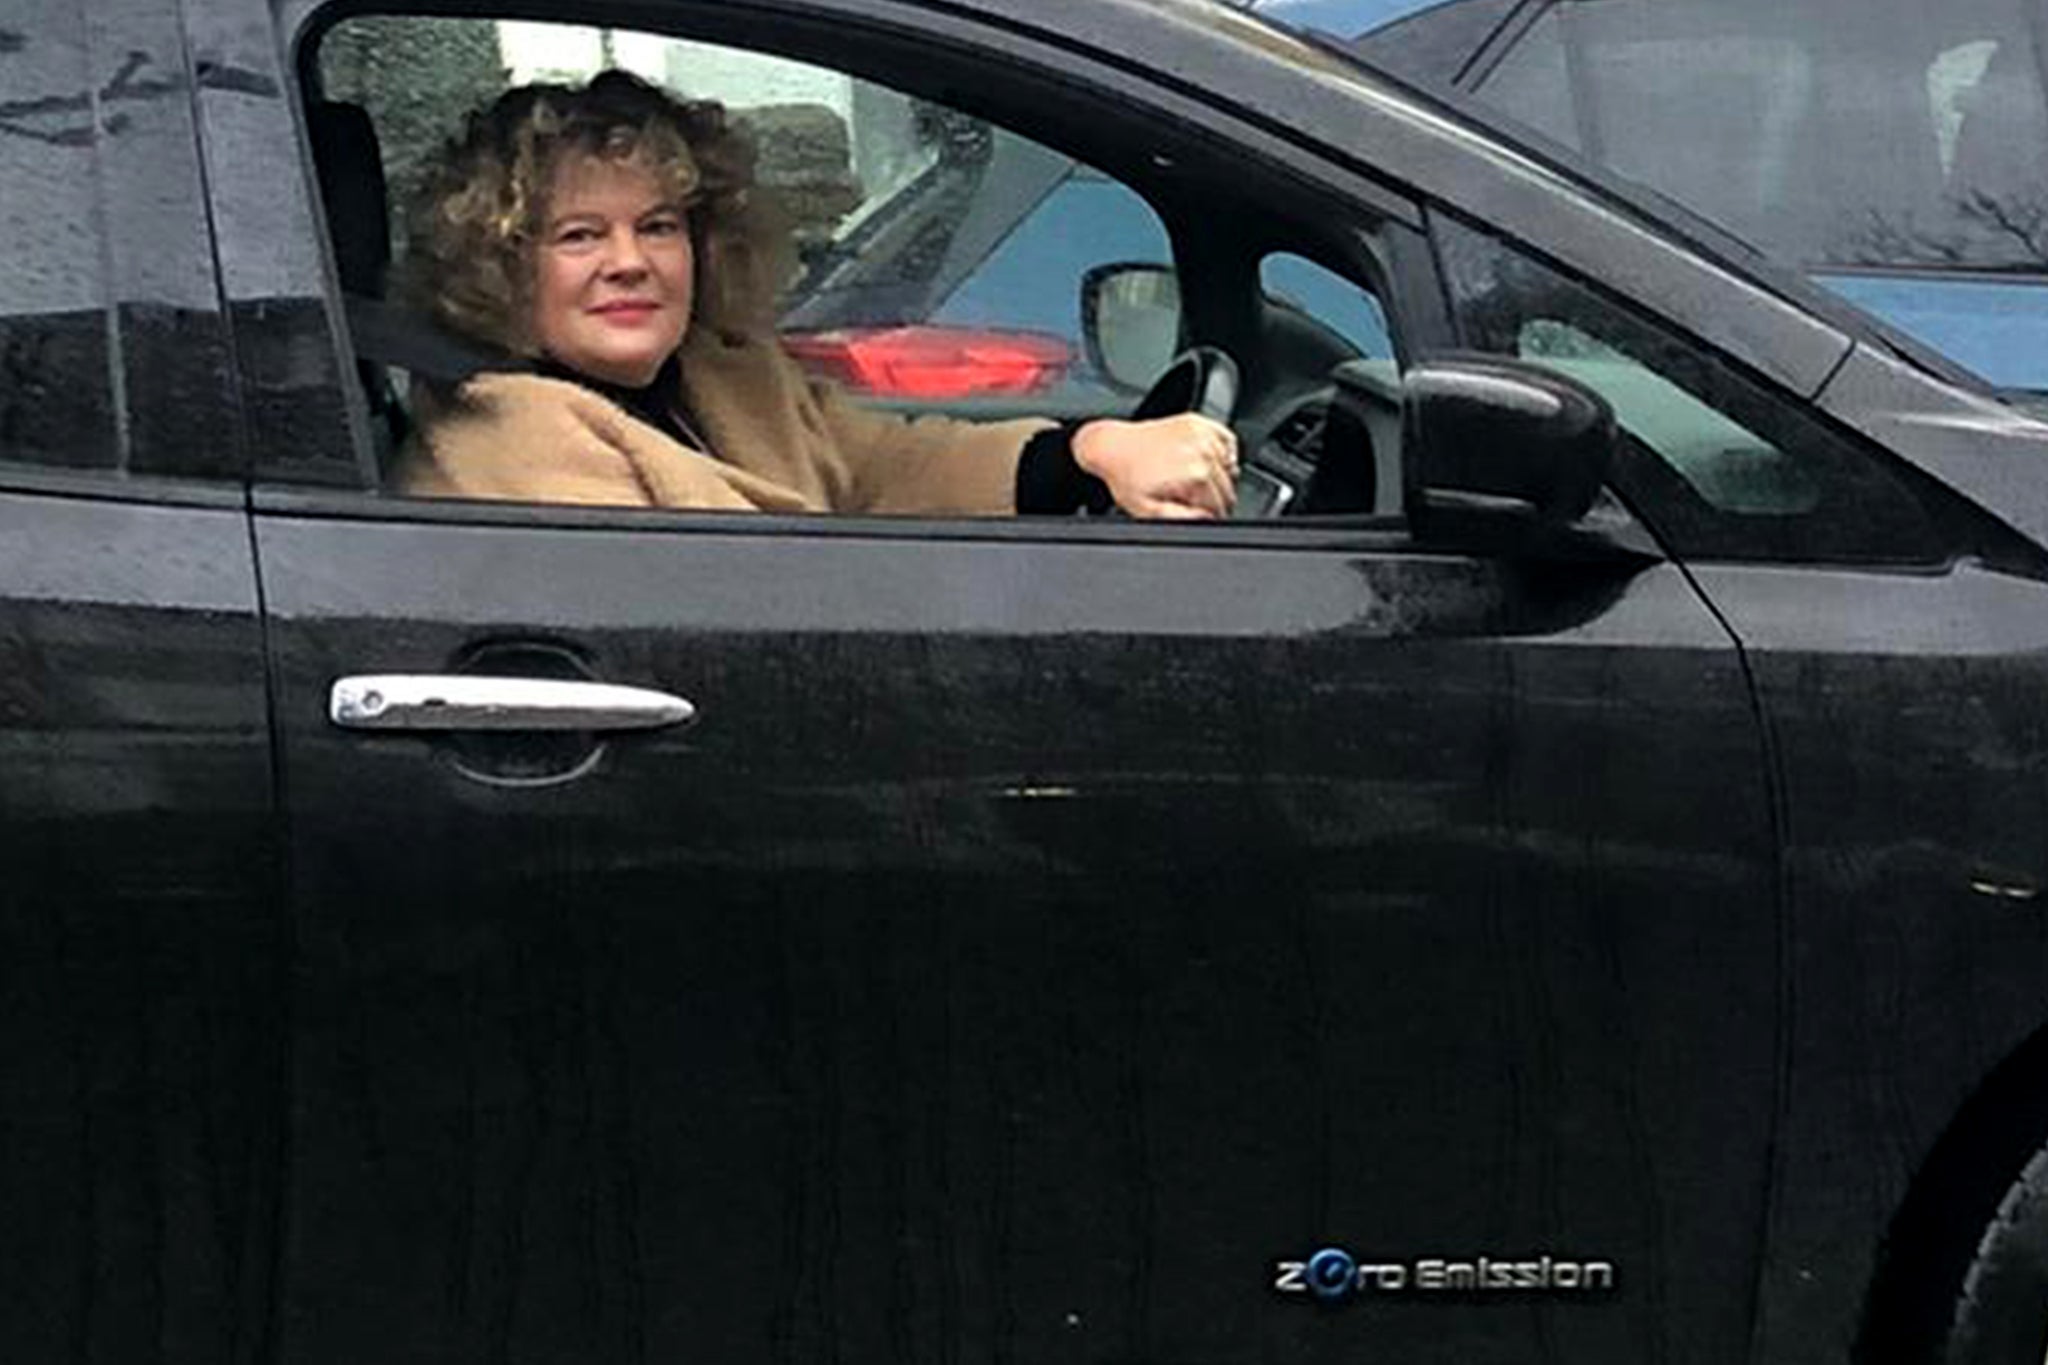 Eleanor bought her electric car three years ago but the advantages she feels while driving in town disappear the minute she wants to make a long journey